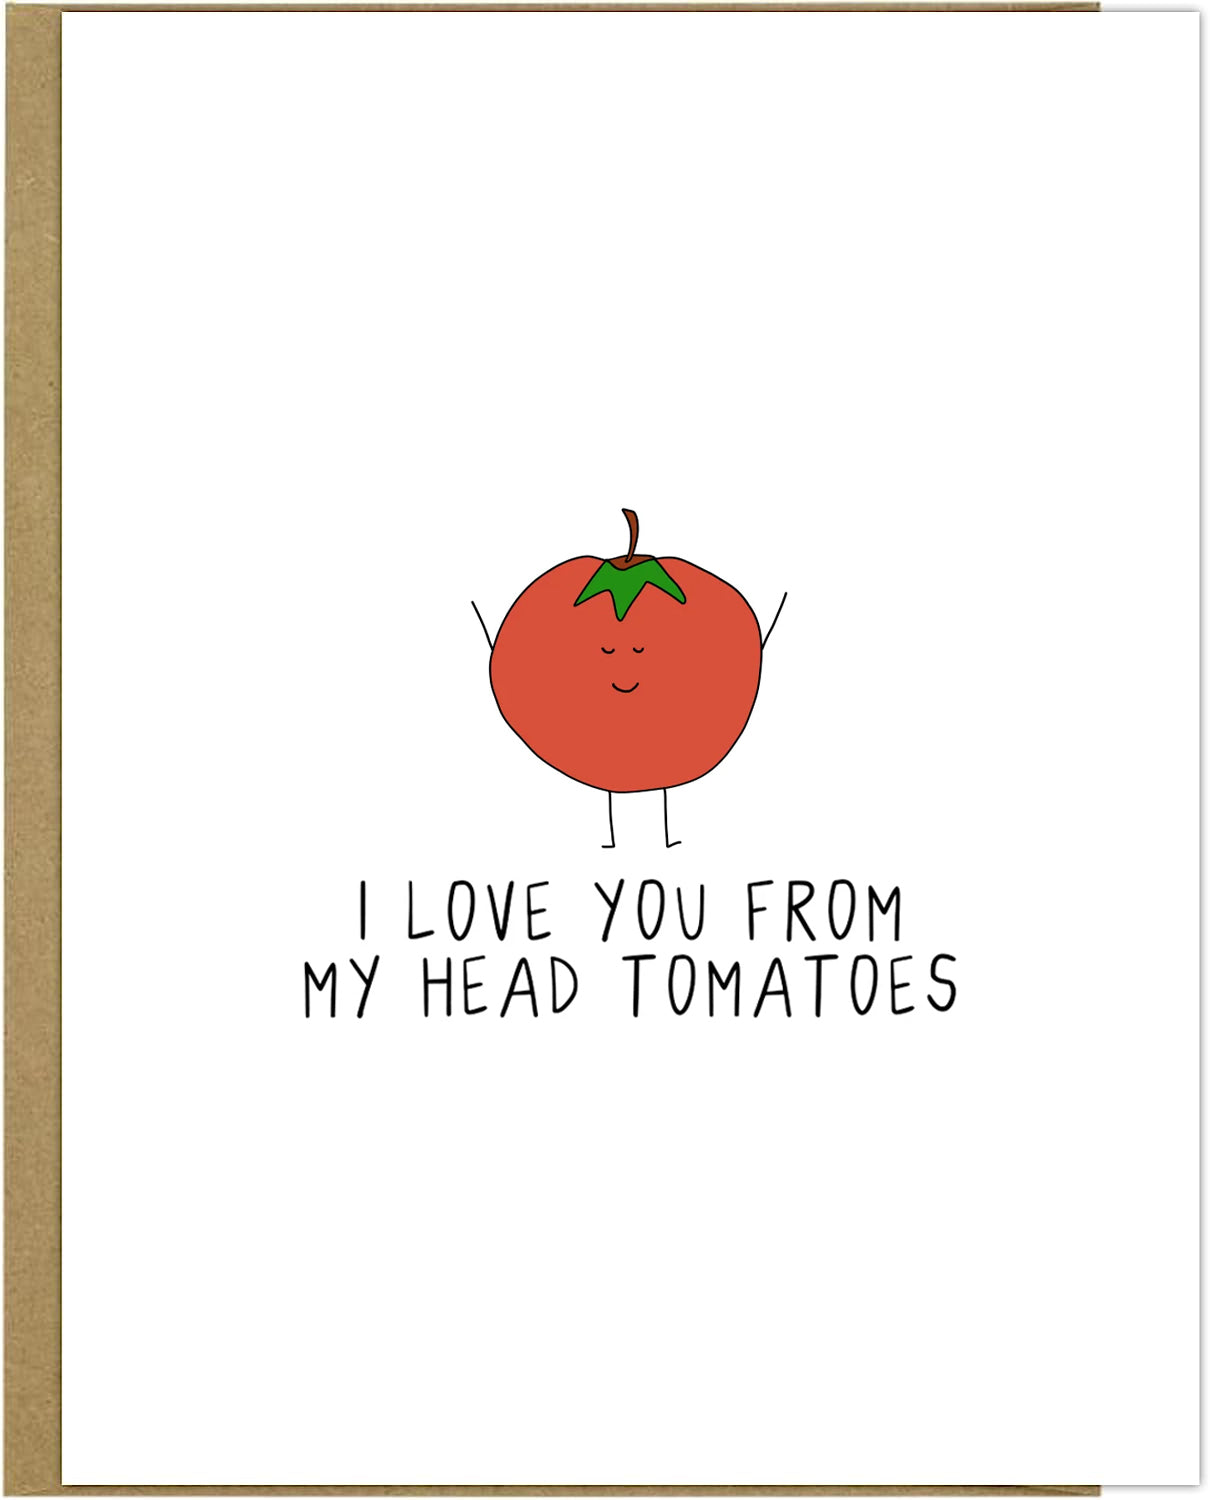 I love you from my Head Tomatoes rockdoodles greeting card in a plastic sleeve.